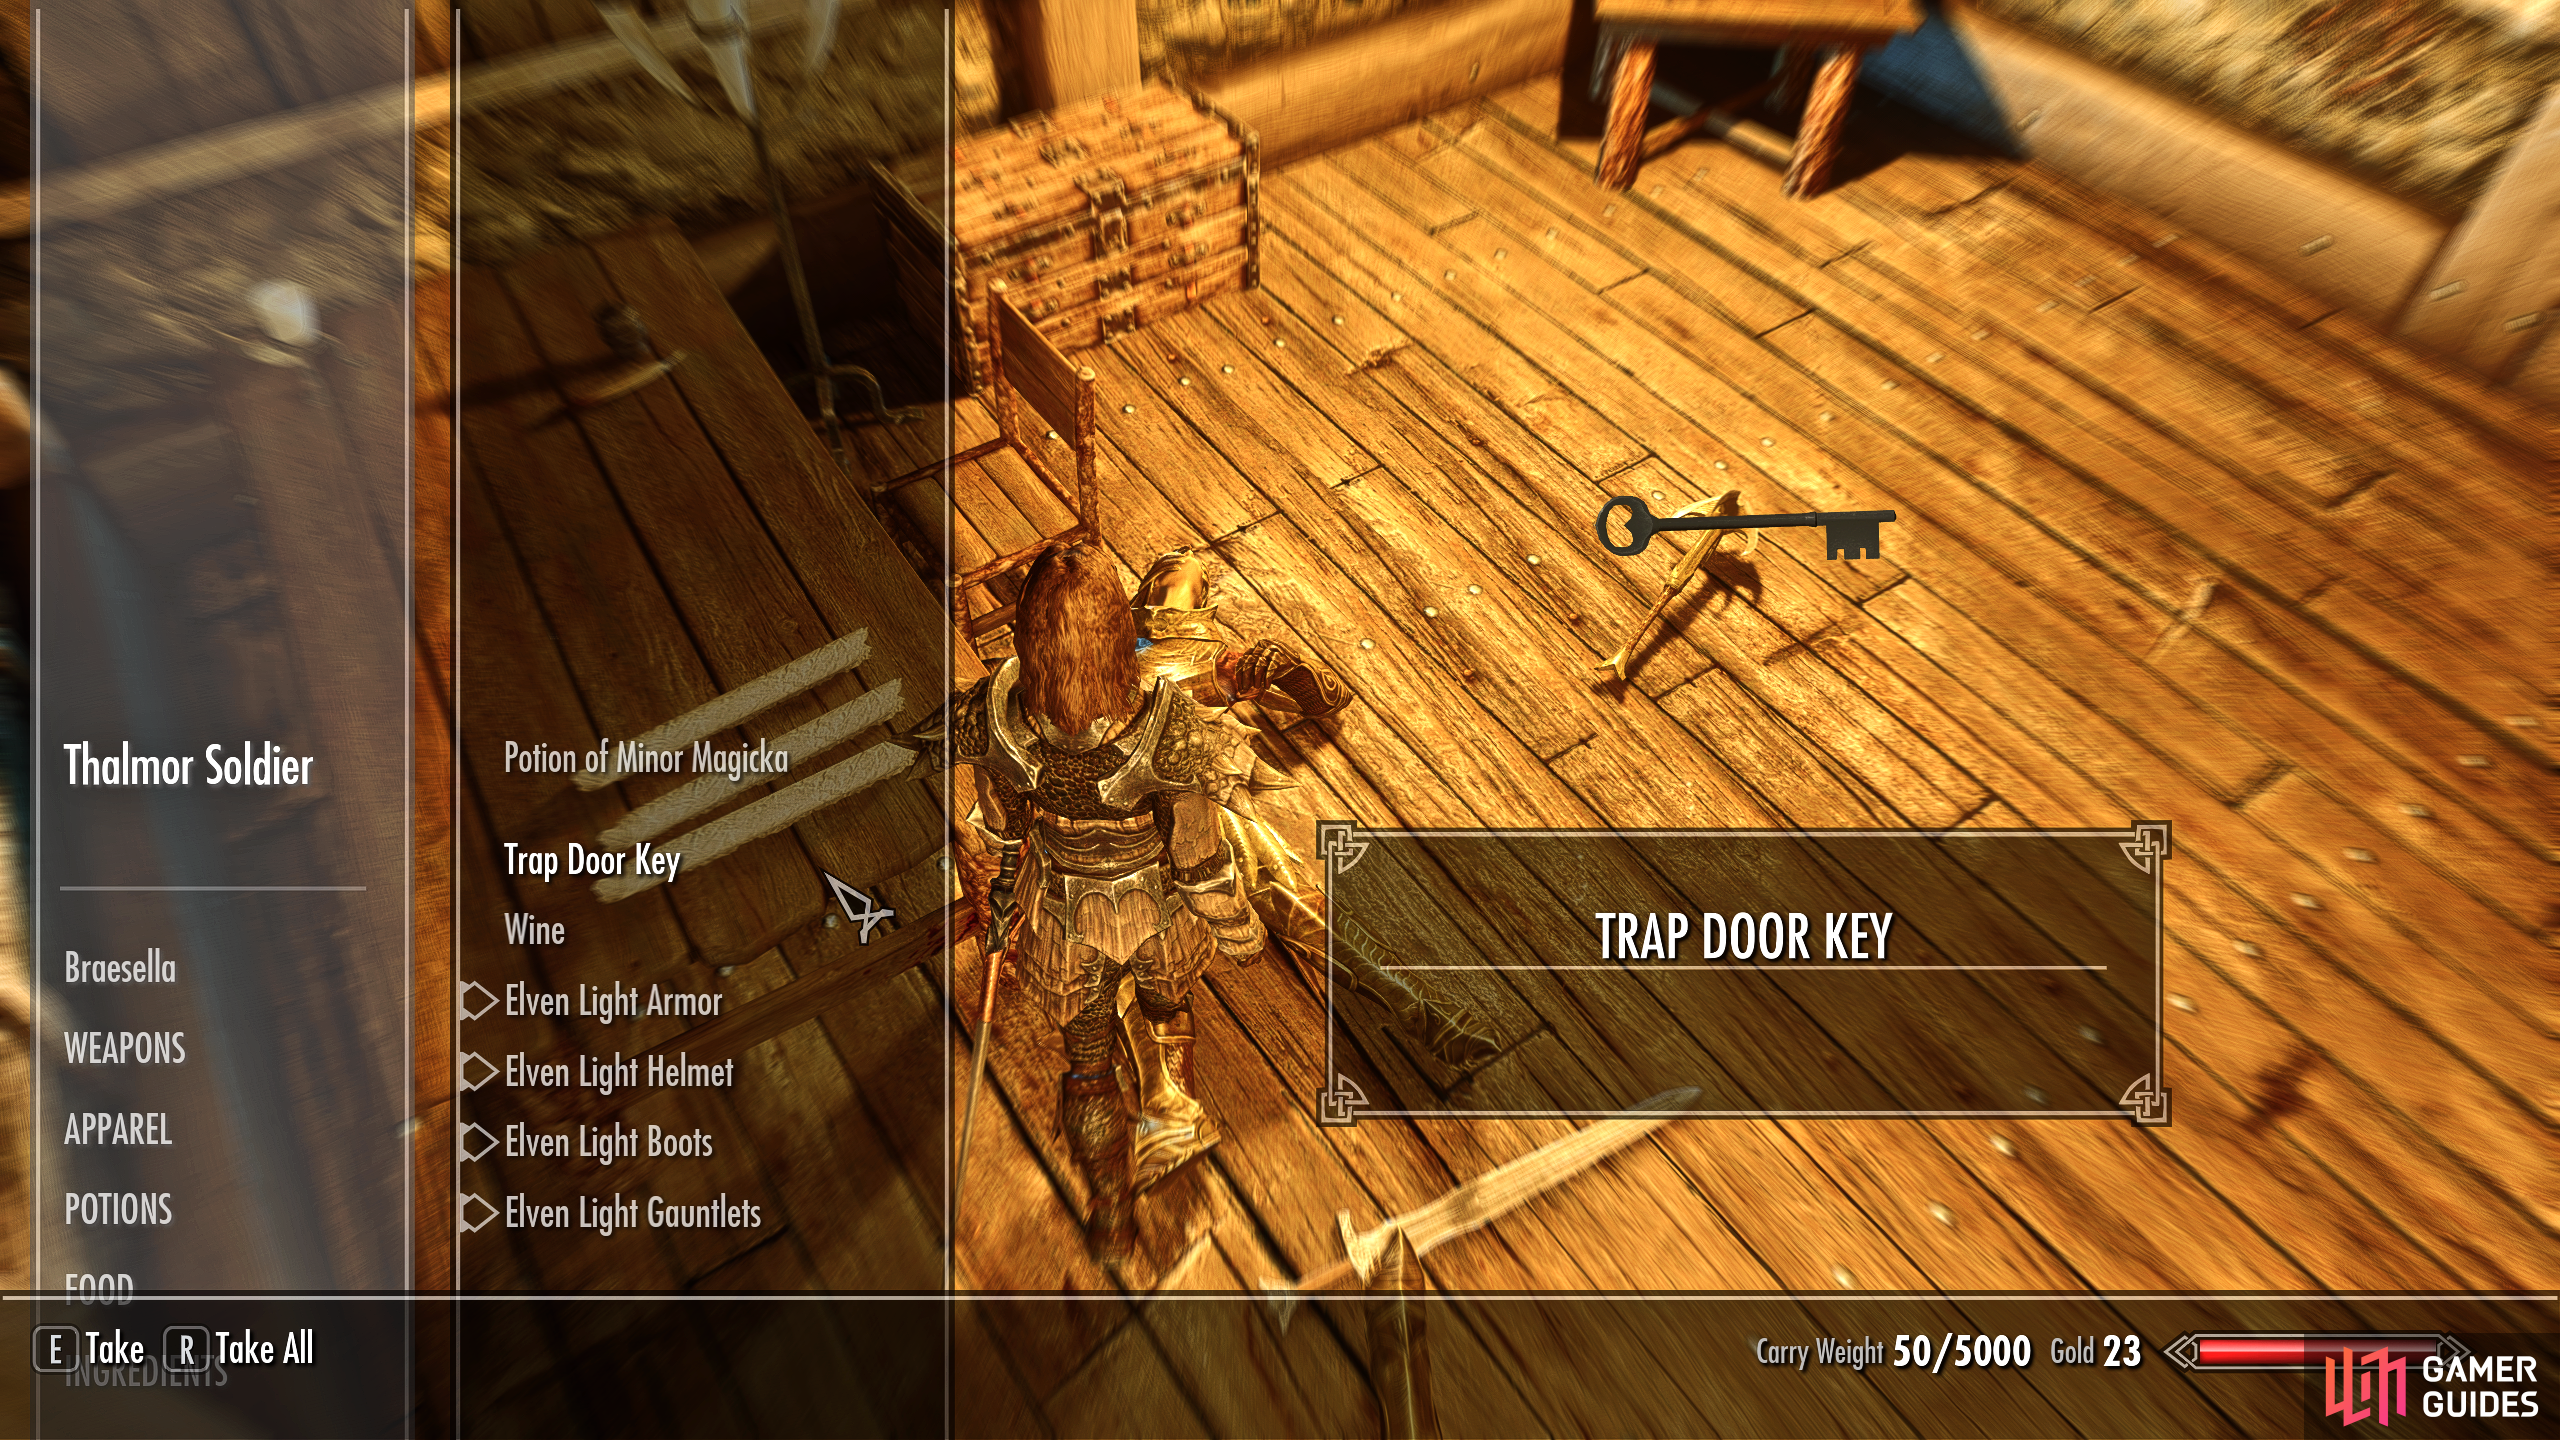 You'll find the Trap Door Key from one of the Thalmor guards.